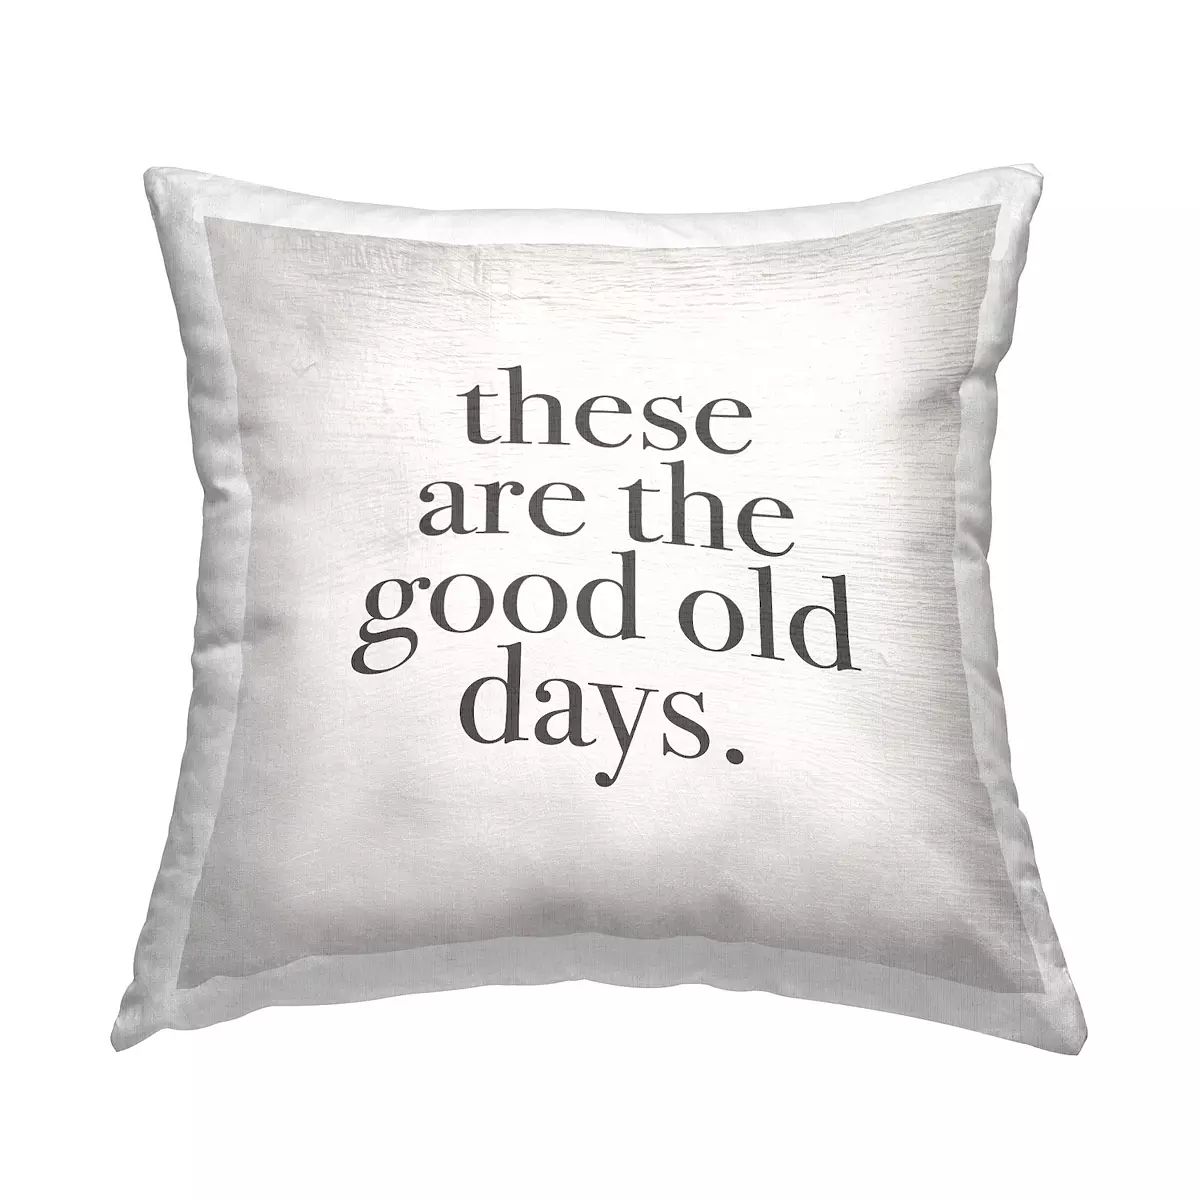 Stupell Home Decor These Are The Good Old Days Decorative Throw Pillow | Kohl's